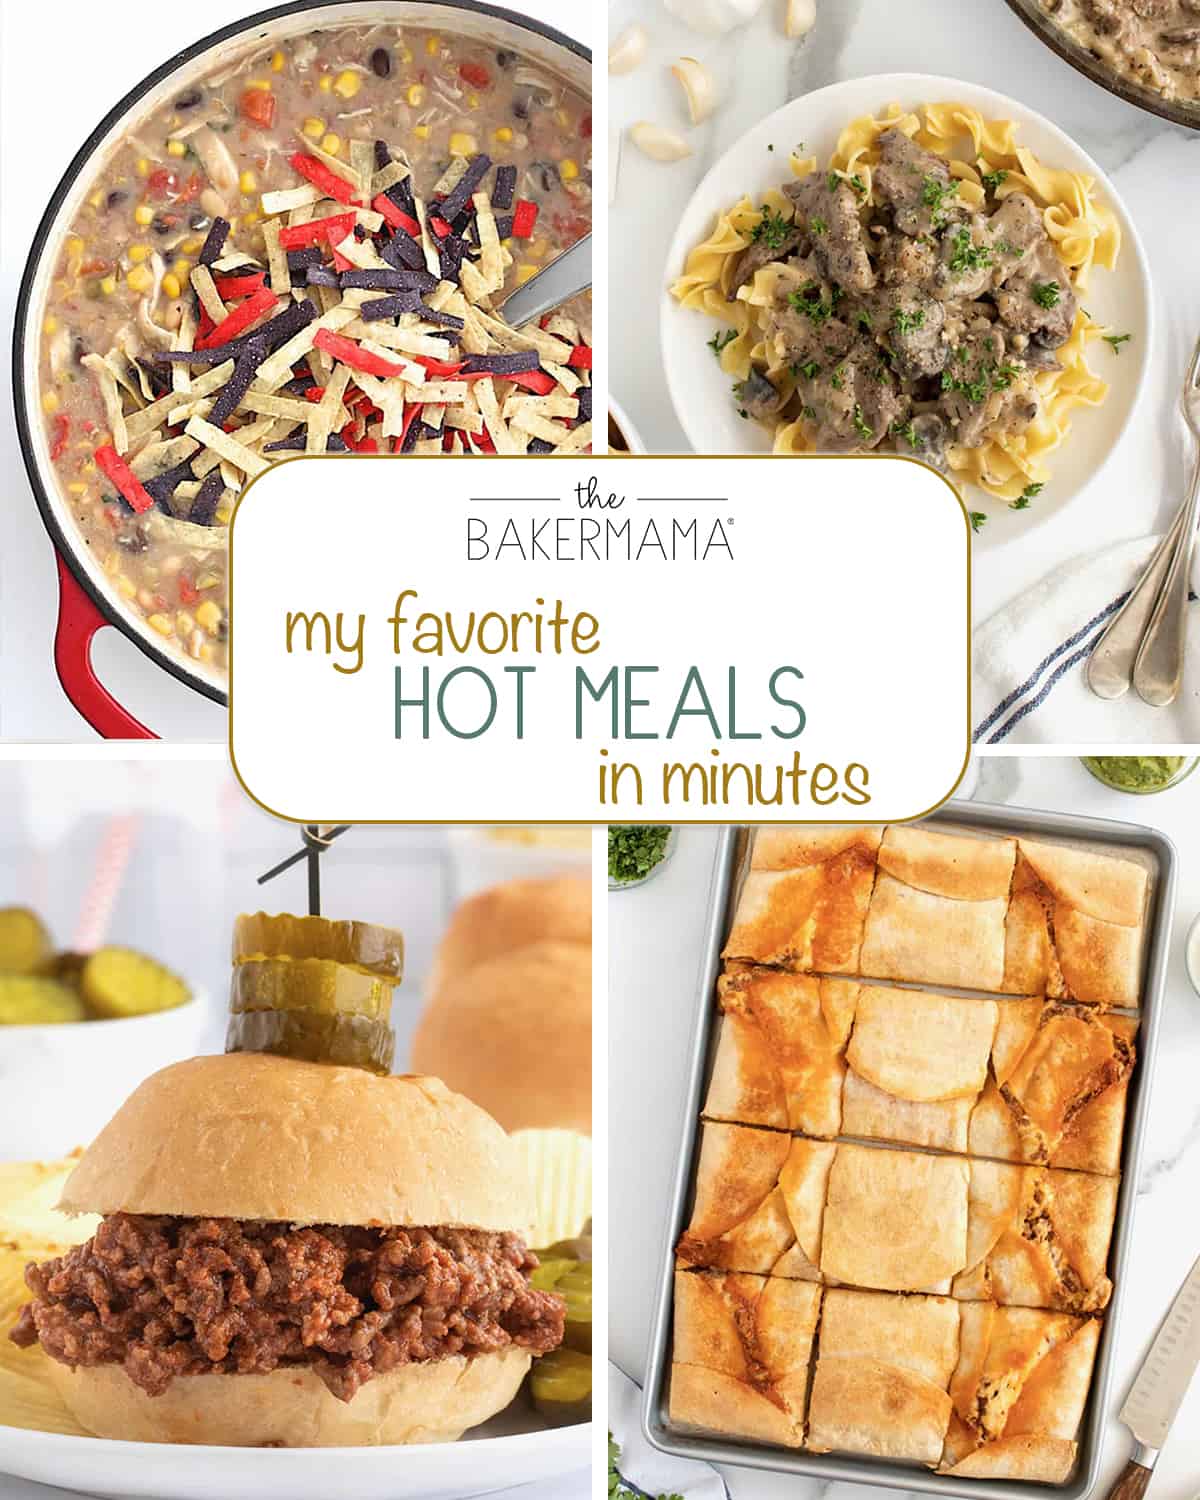 Hot Meals in Minutes by The BakerMama